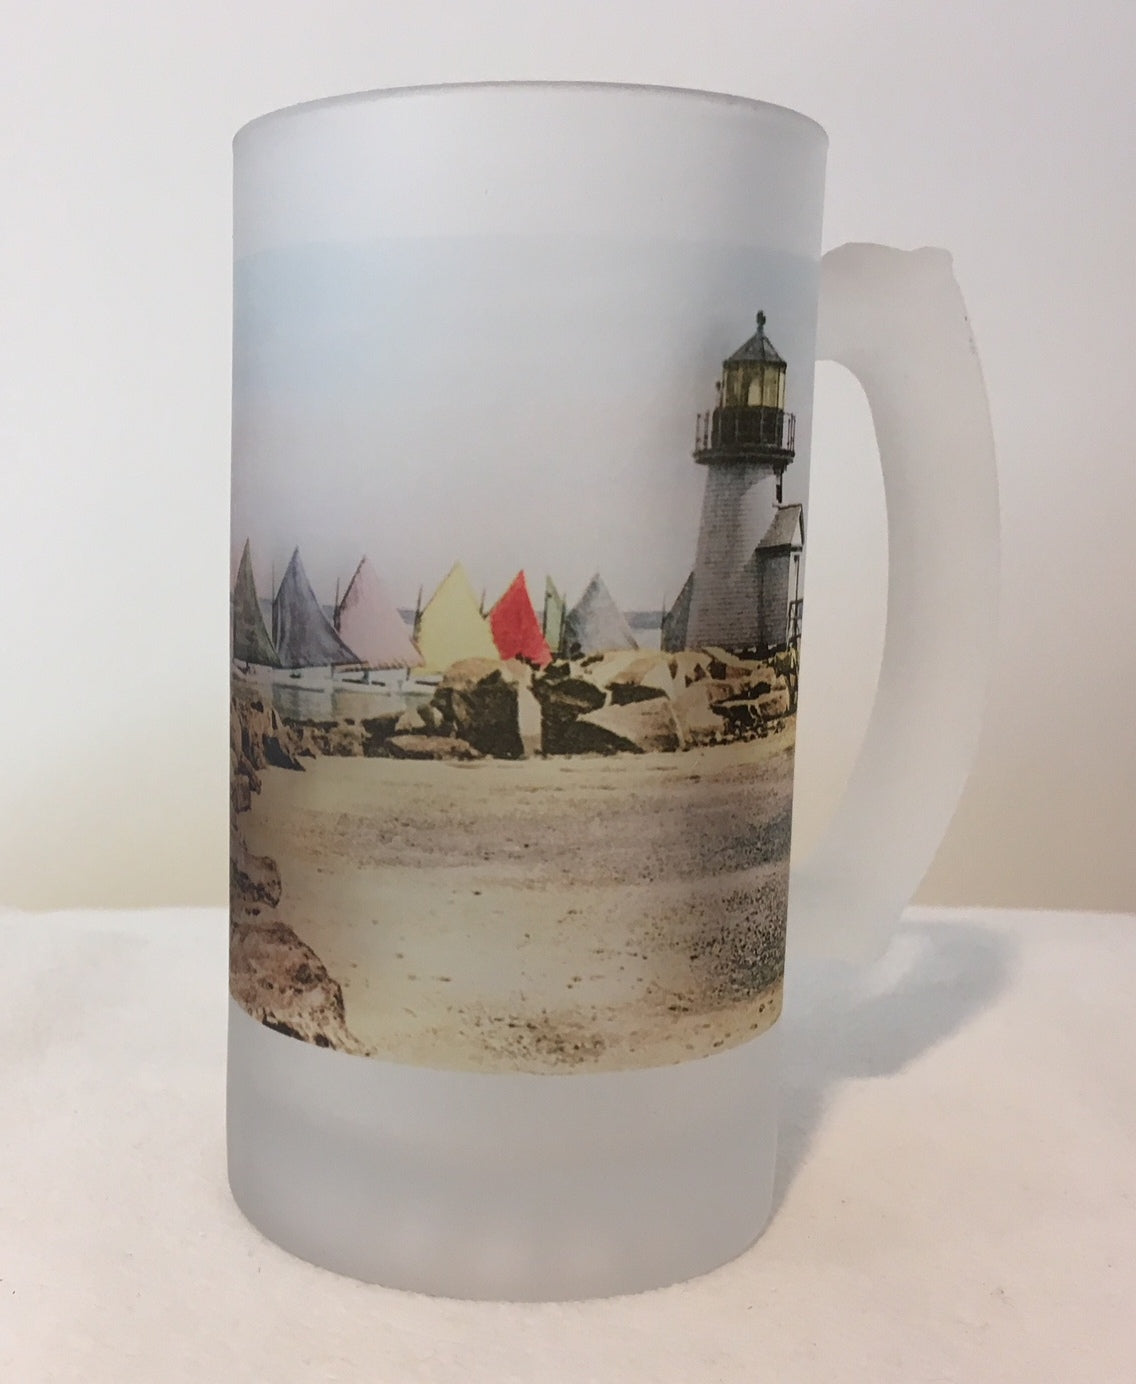 Colorful Frosted Glass Beer Mug of Nantucket's Rainbow Fleet Rounding Brant Point - That Fabled Shore Home Decor